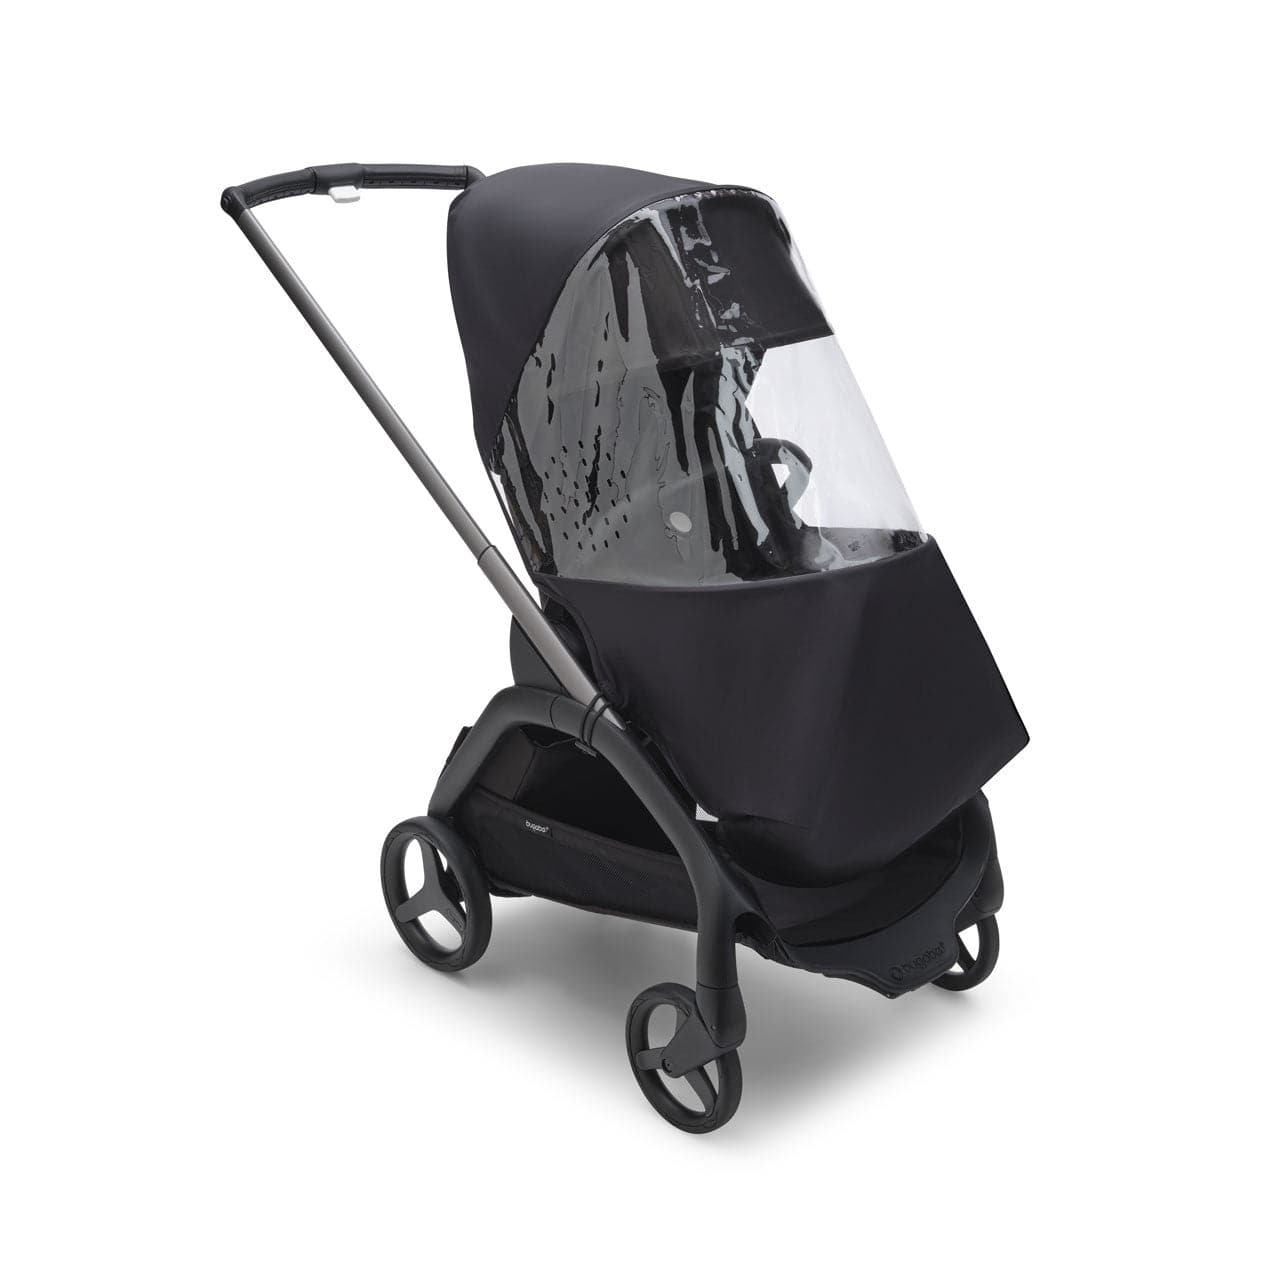 Bugaboo Dragonfly Raincover - For Your Little One